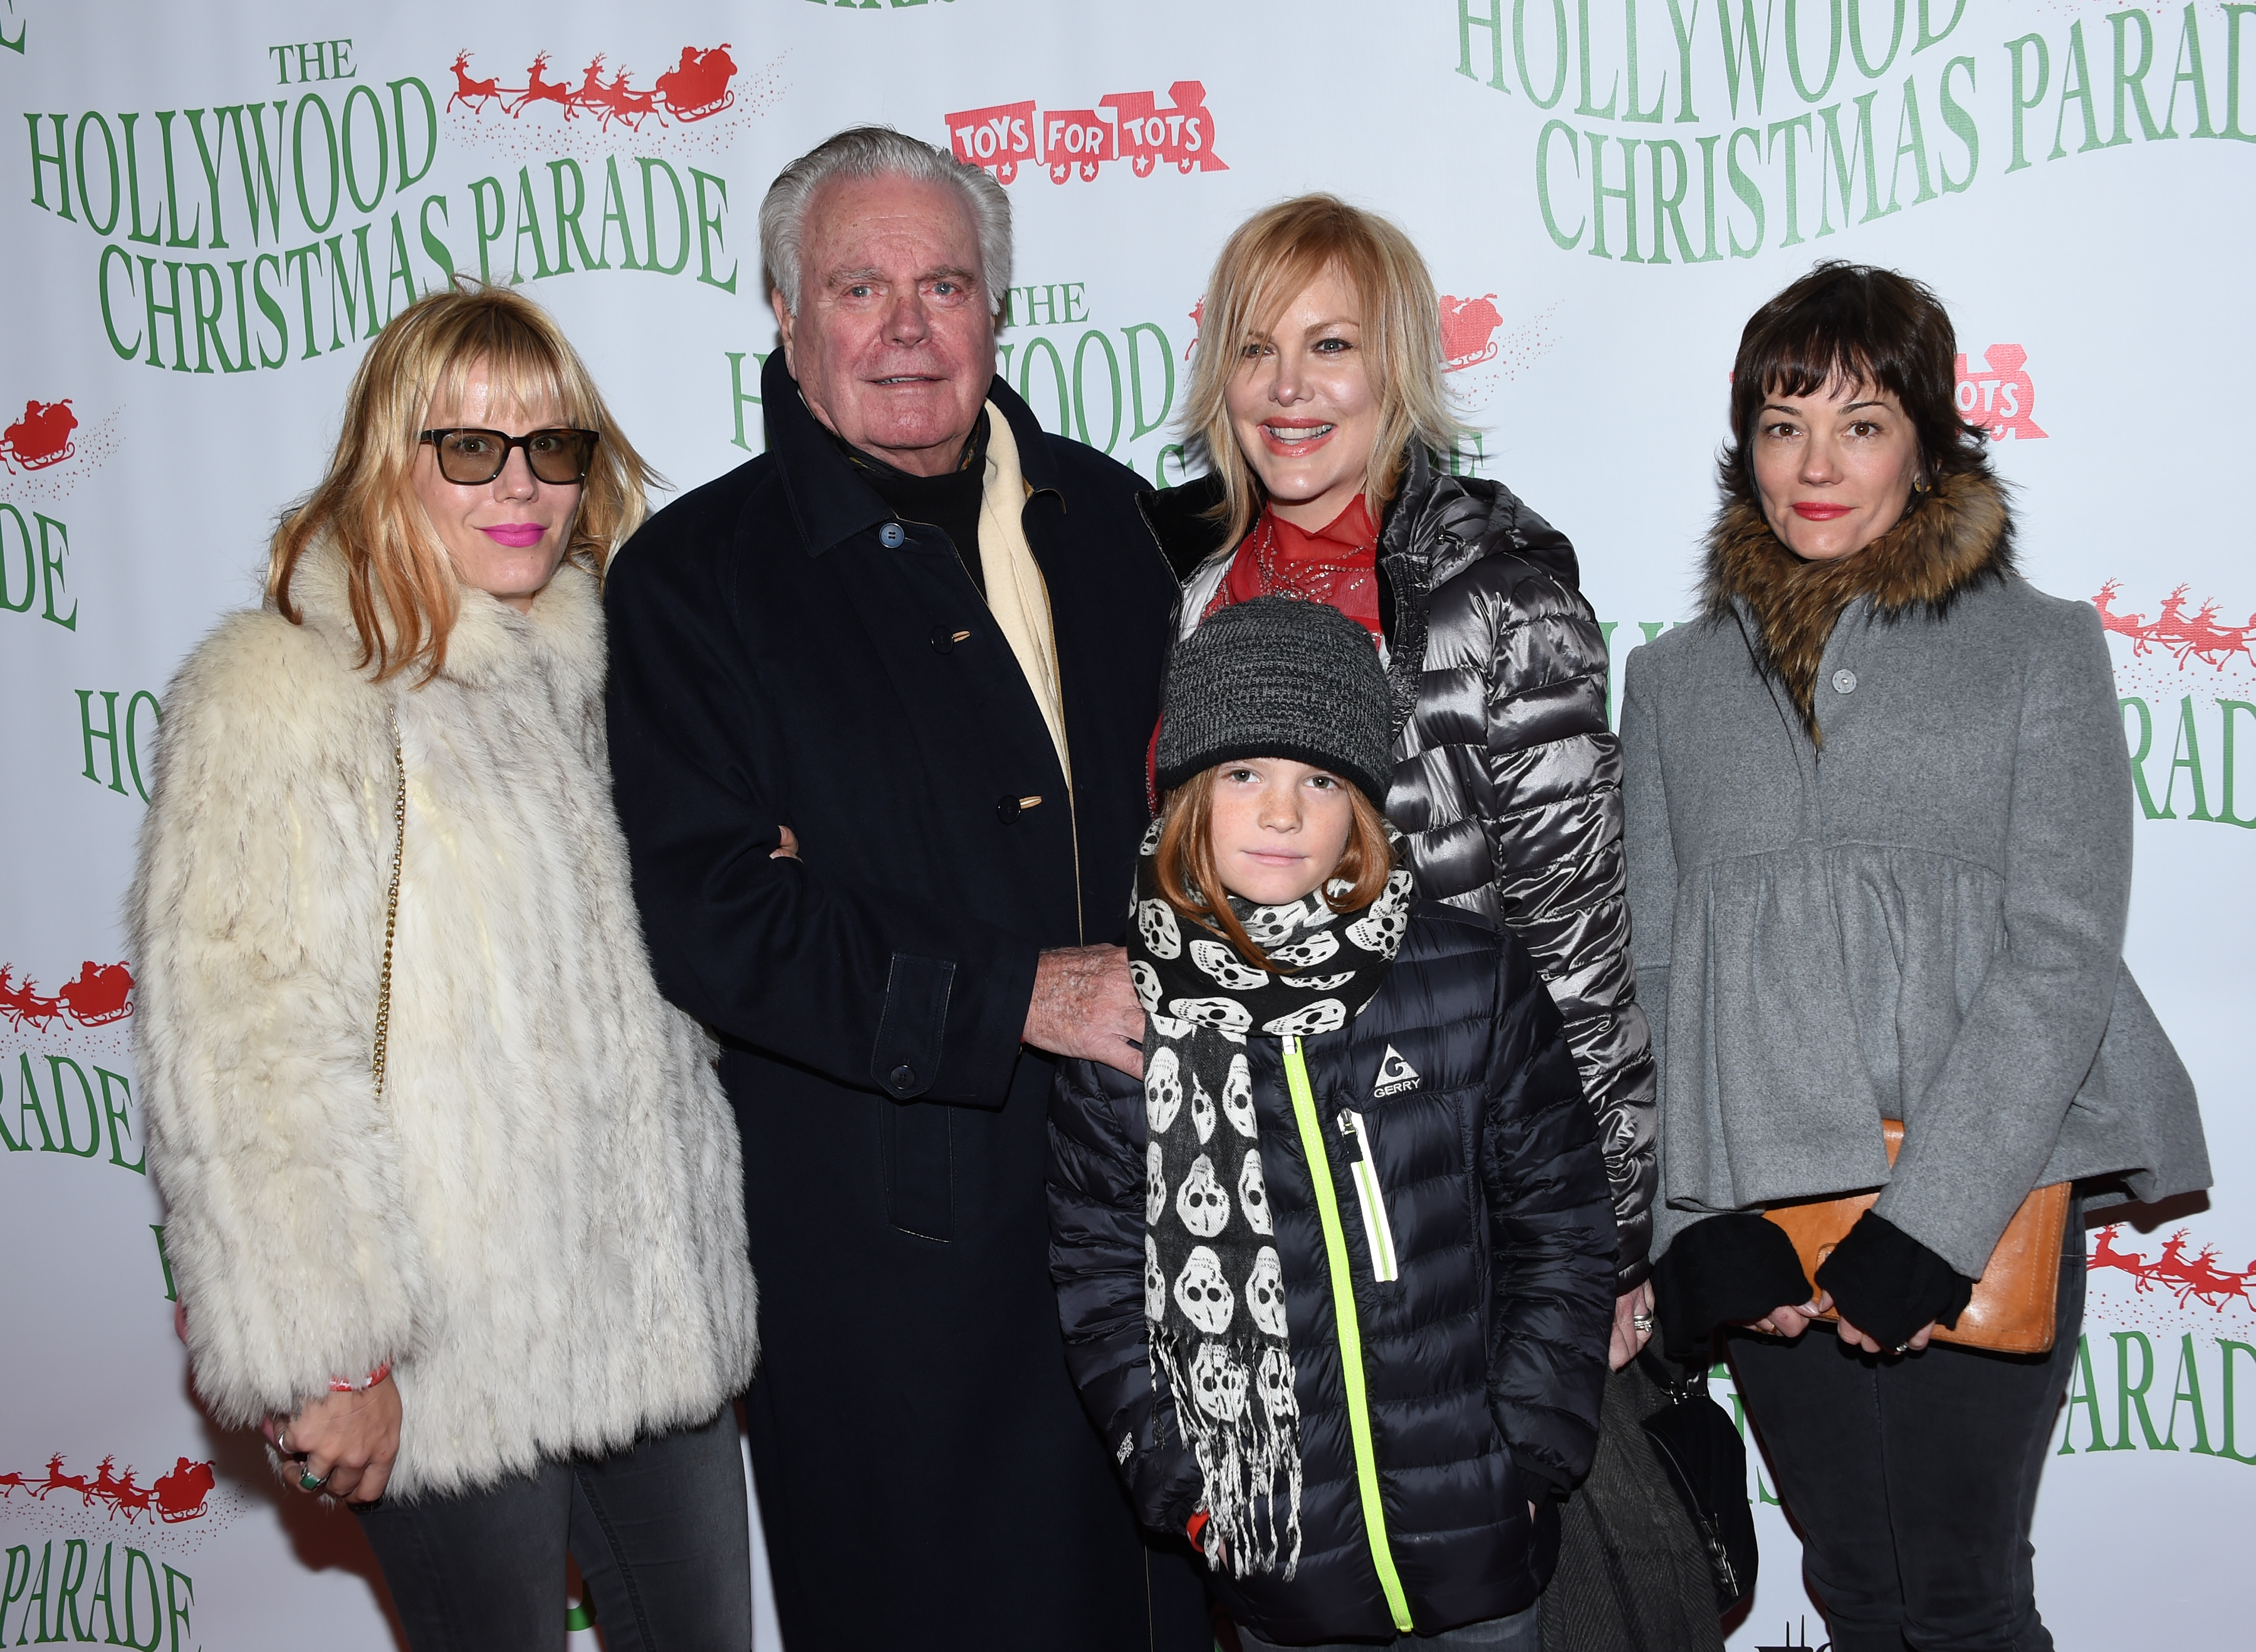 Robert Wagner with daughters and grandson arrive at the 85th annual Hollywood Christmas parade on Hollywood Boulevard on November 27, 2016. | Source: Getty Images